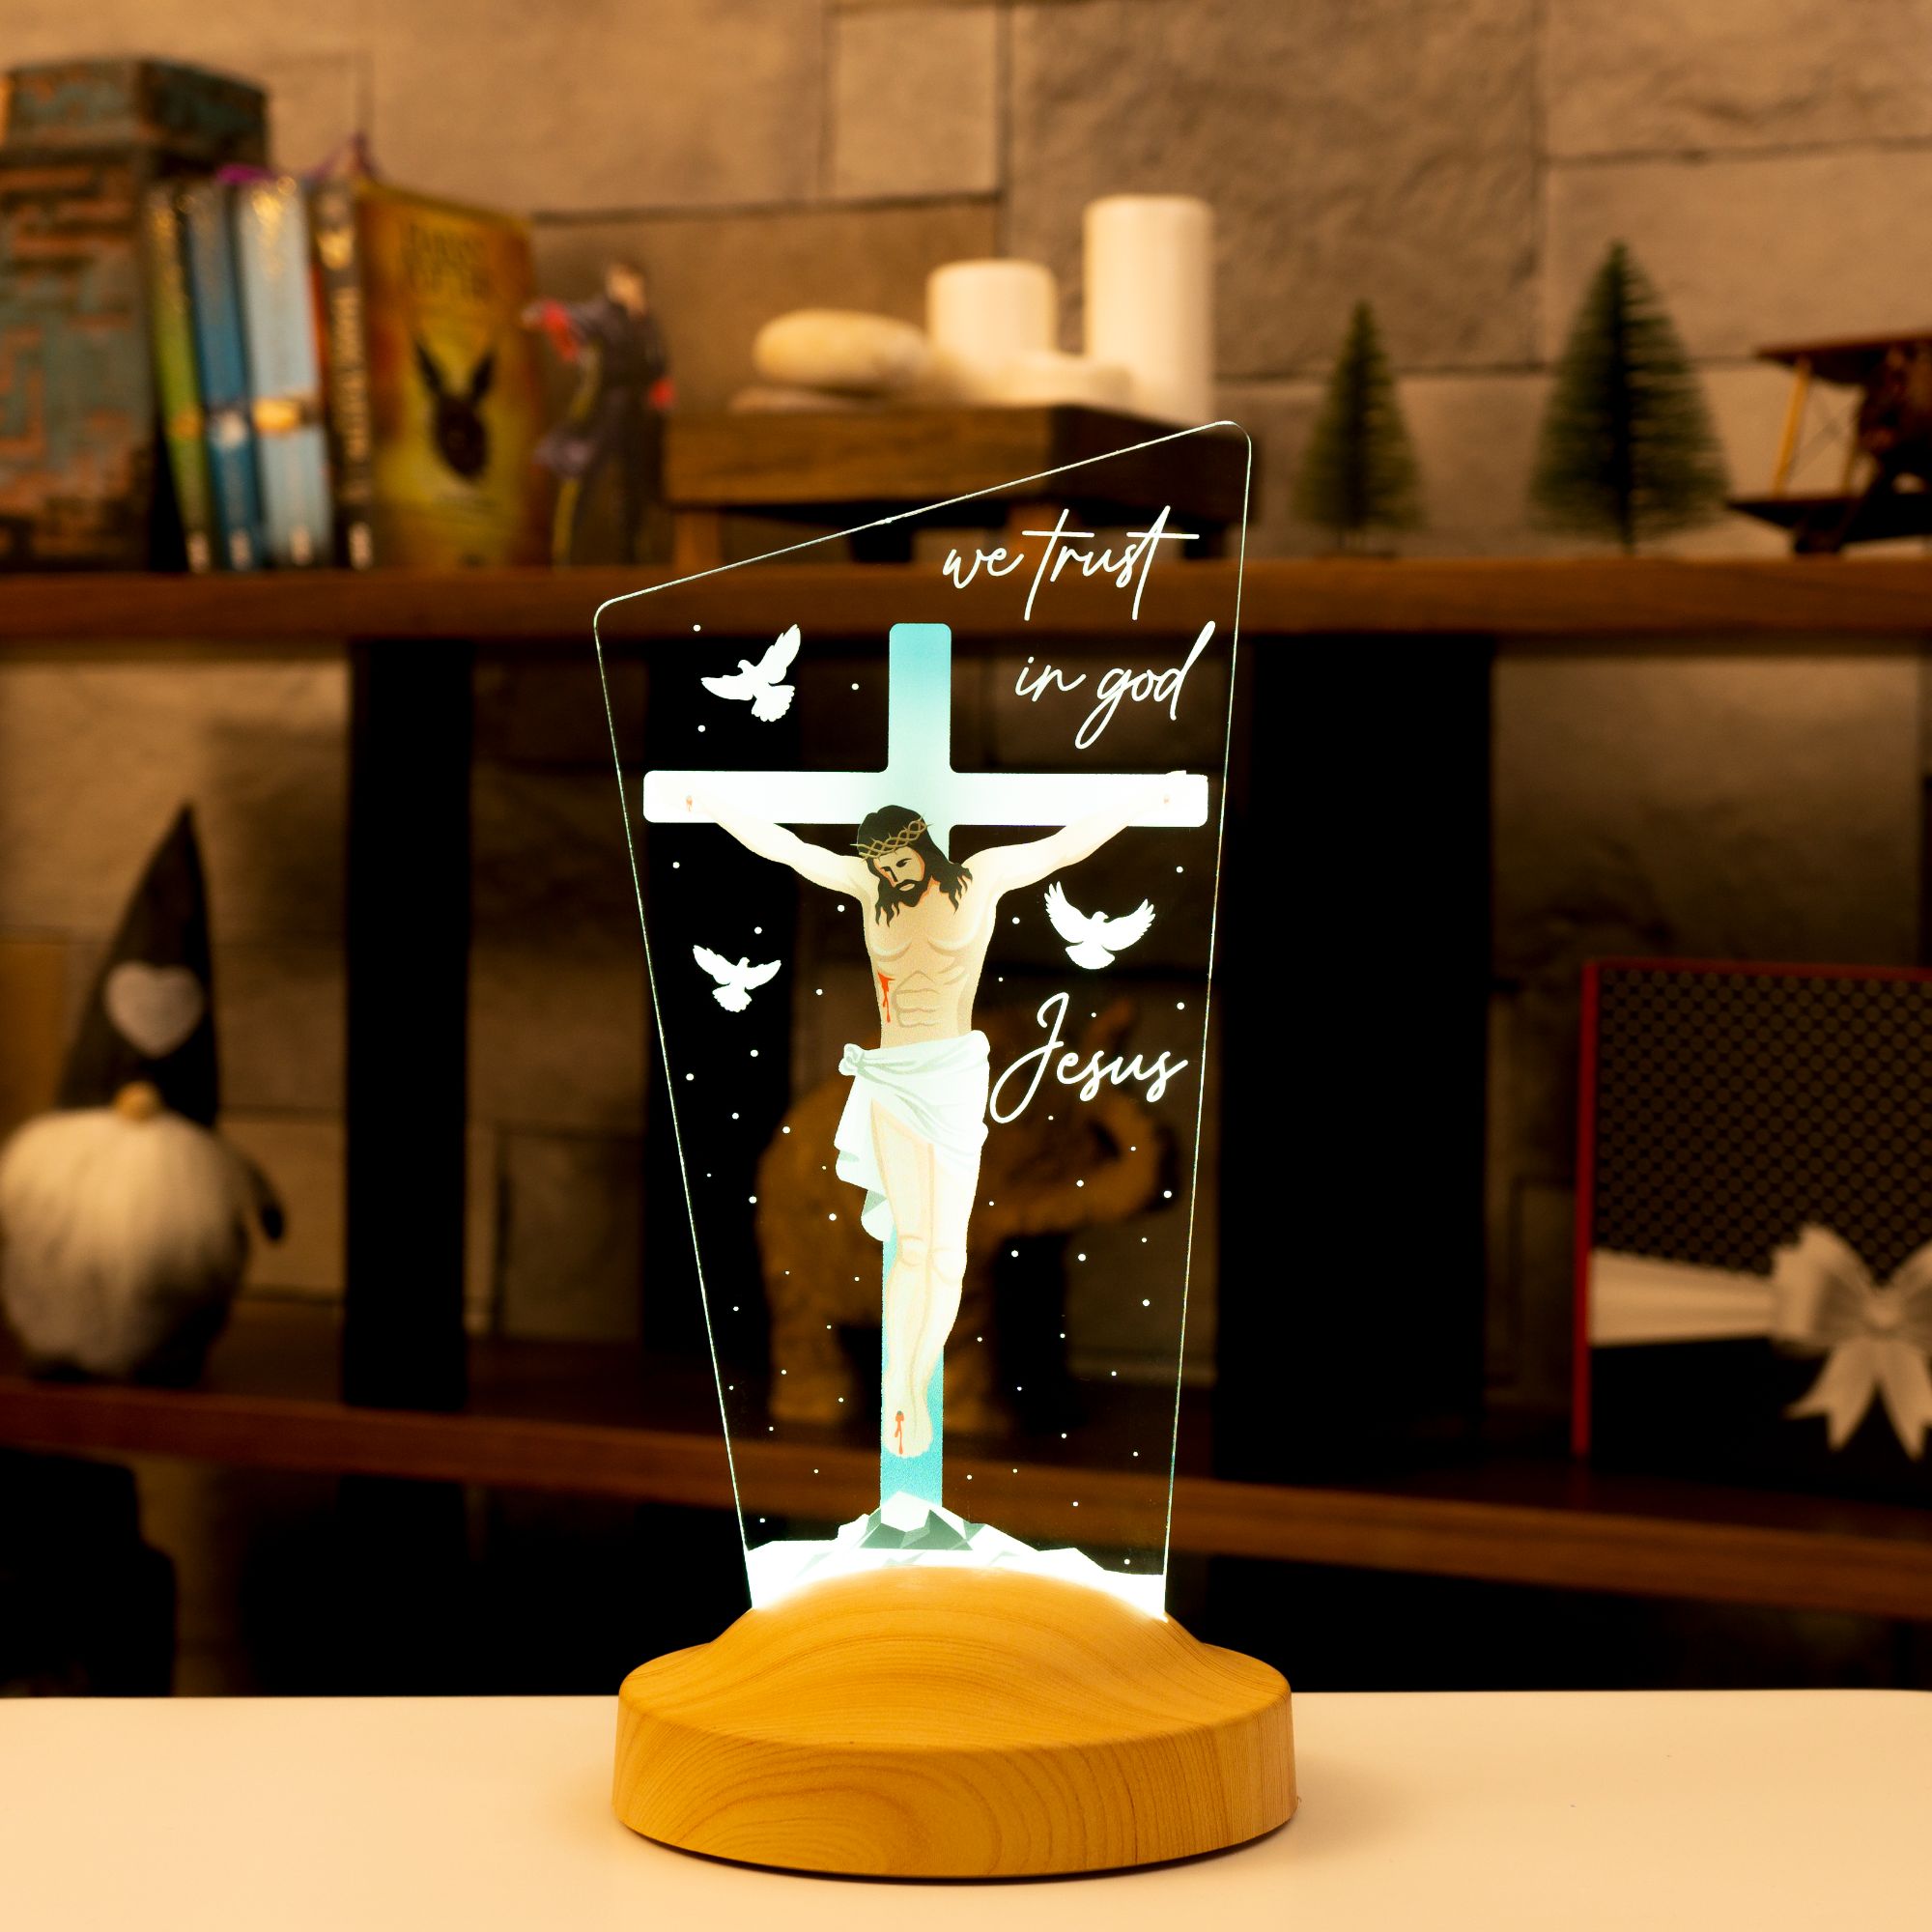 Gift for religious friends| Customize Christian Lamp Gift | Acrylic glass cross |